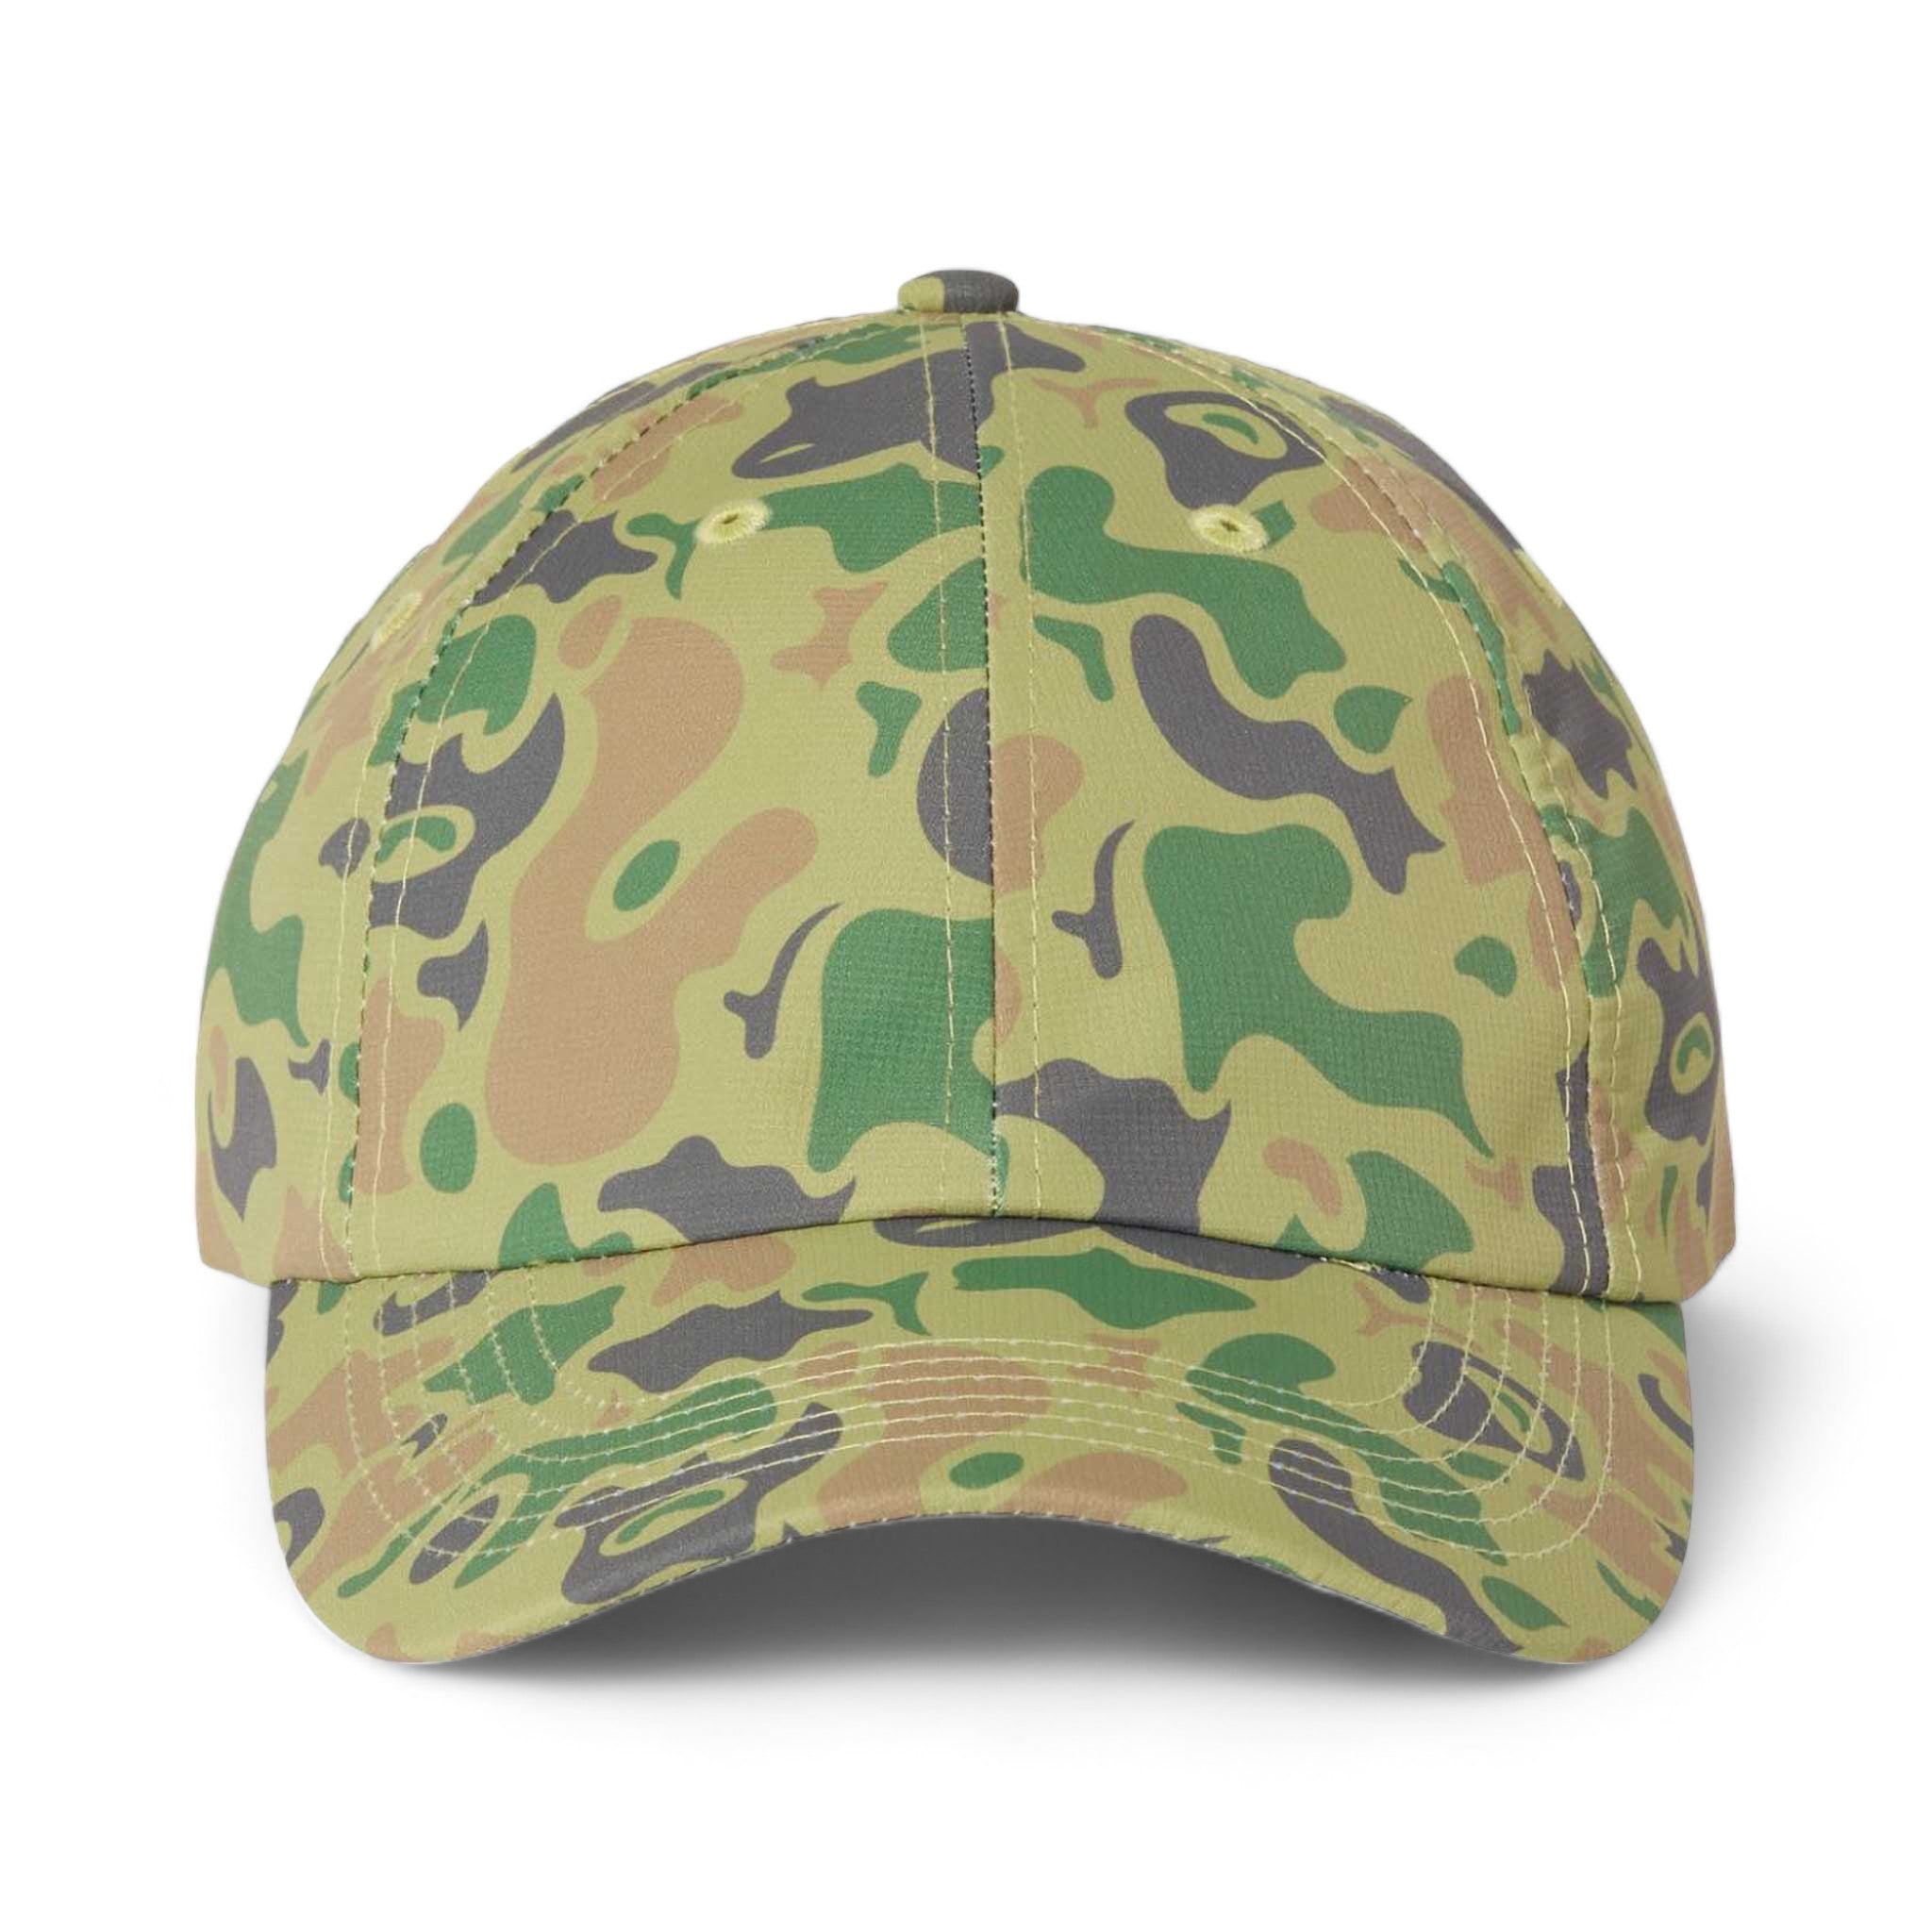 Front view of Imperial X210R custom hat in green duck camo